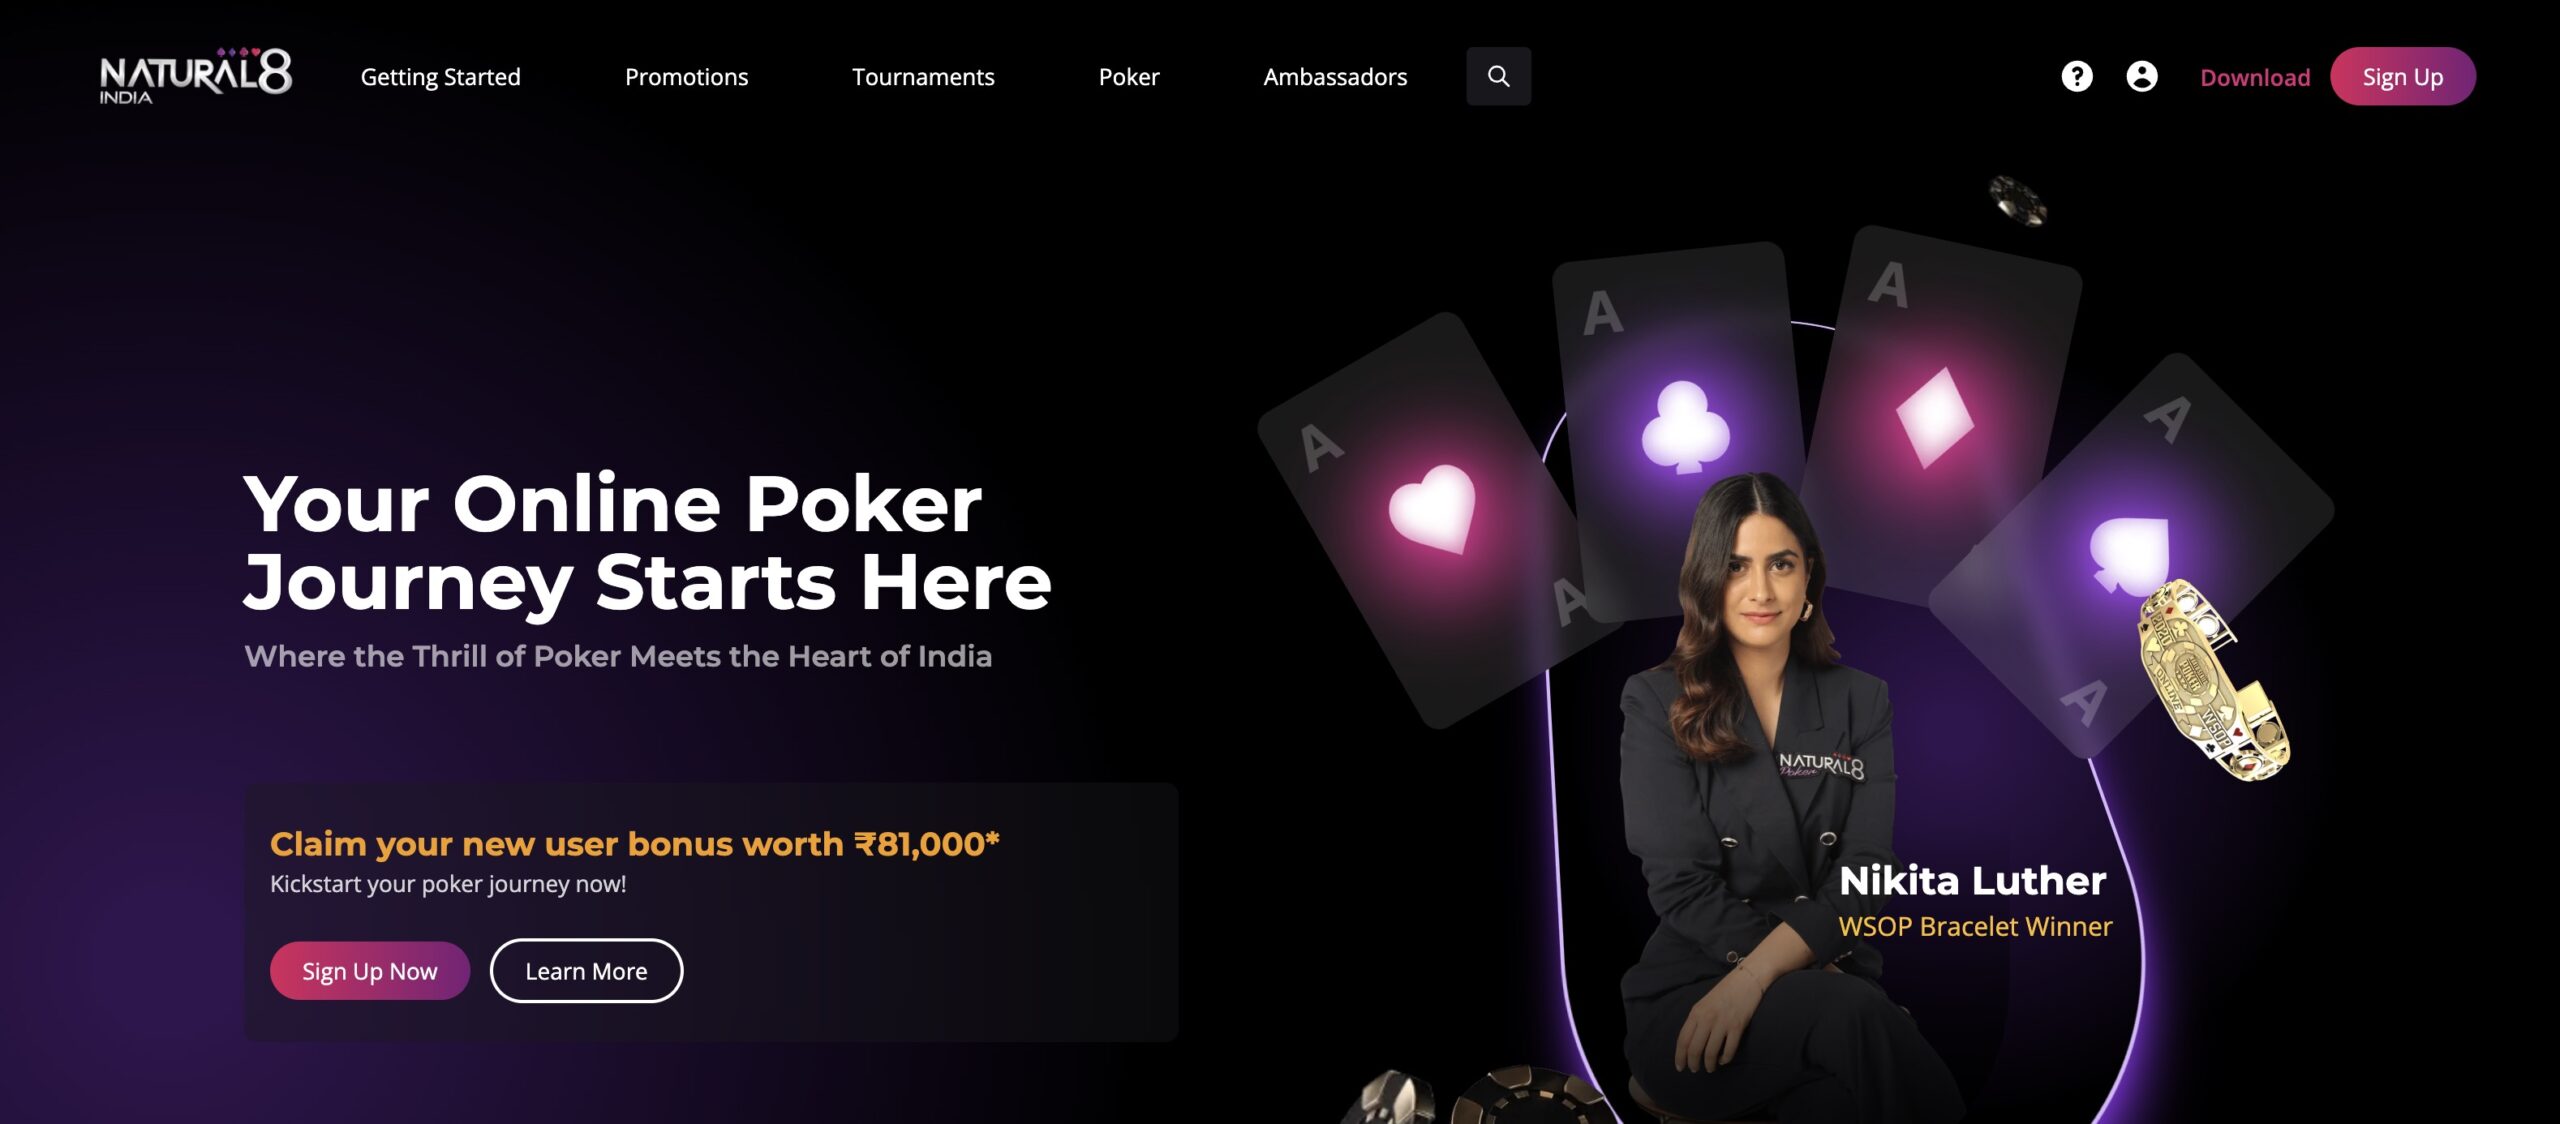 Poker and AI: How Artificial Intelligence is Changing the Game